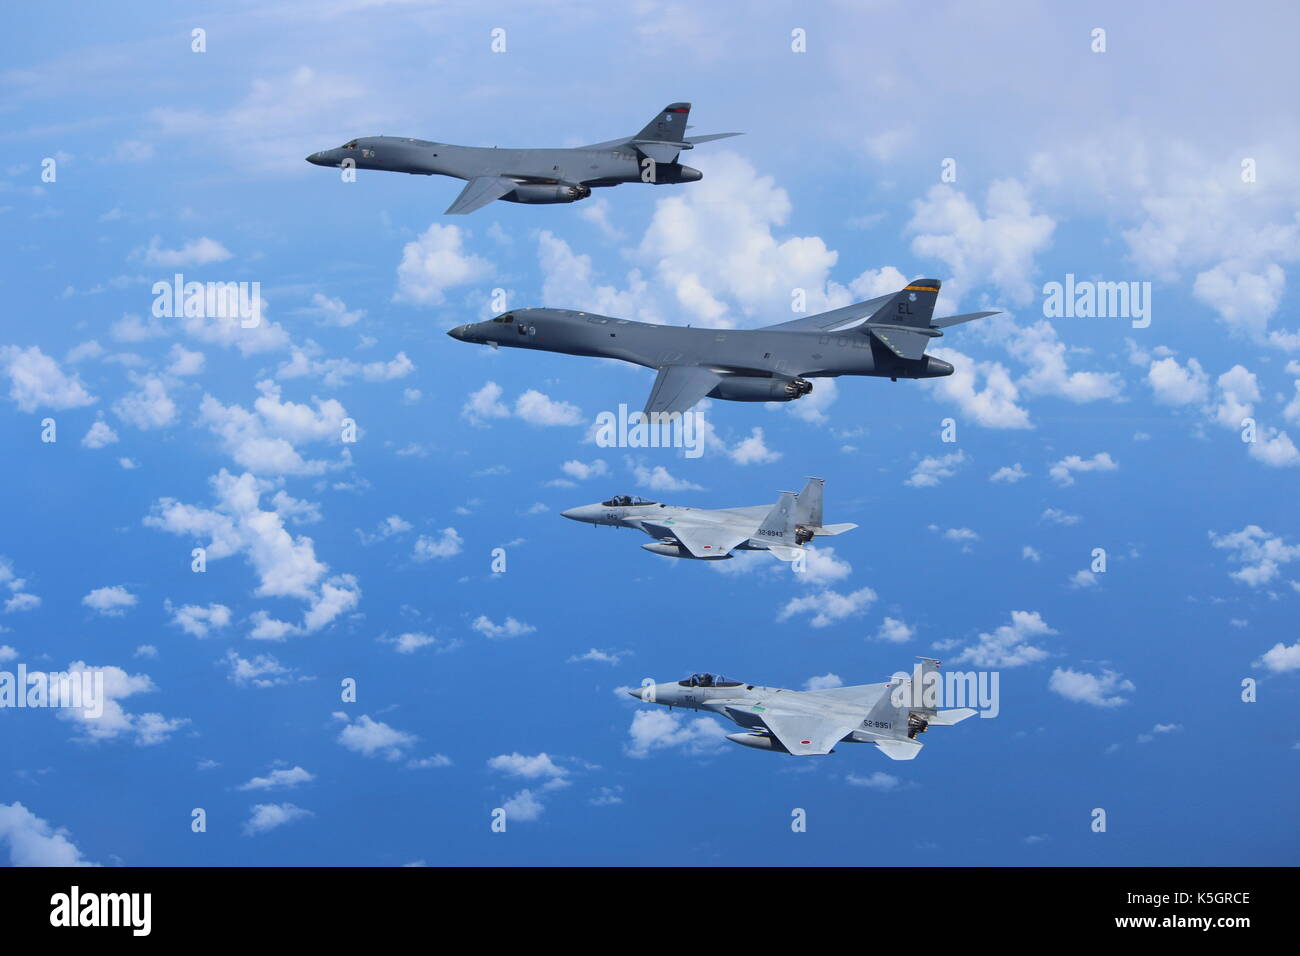 East China Sea, near North Korea. 9th September, 2017. Two U.S. Air Force B-1B Lancer bombers with the 37th Expeditionary Bomb Squadron are escorted by a Japan Air Self-Defense Force F-15 fighter during a joint bilateral patrol as a show of force to North Korea September 9, 2017 over the East China Sea. Credit: Planetpix/Alamy Live News Stock Photo